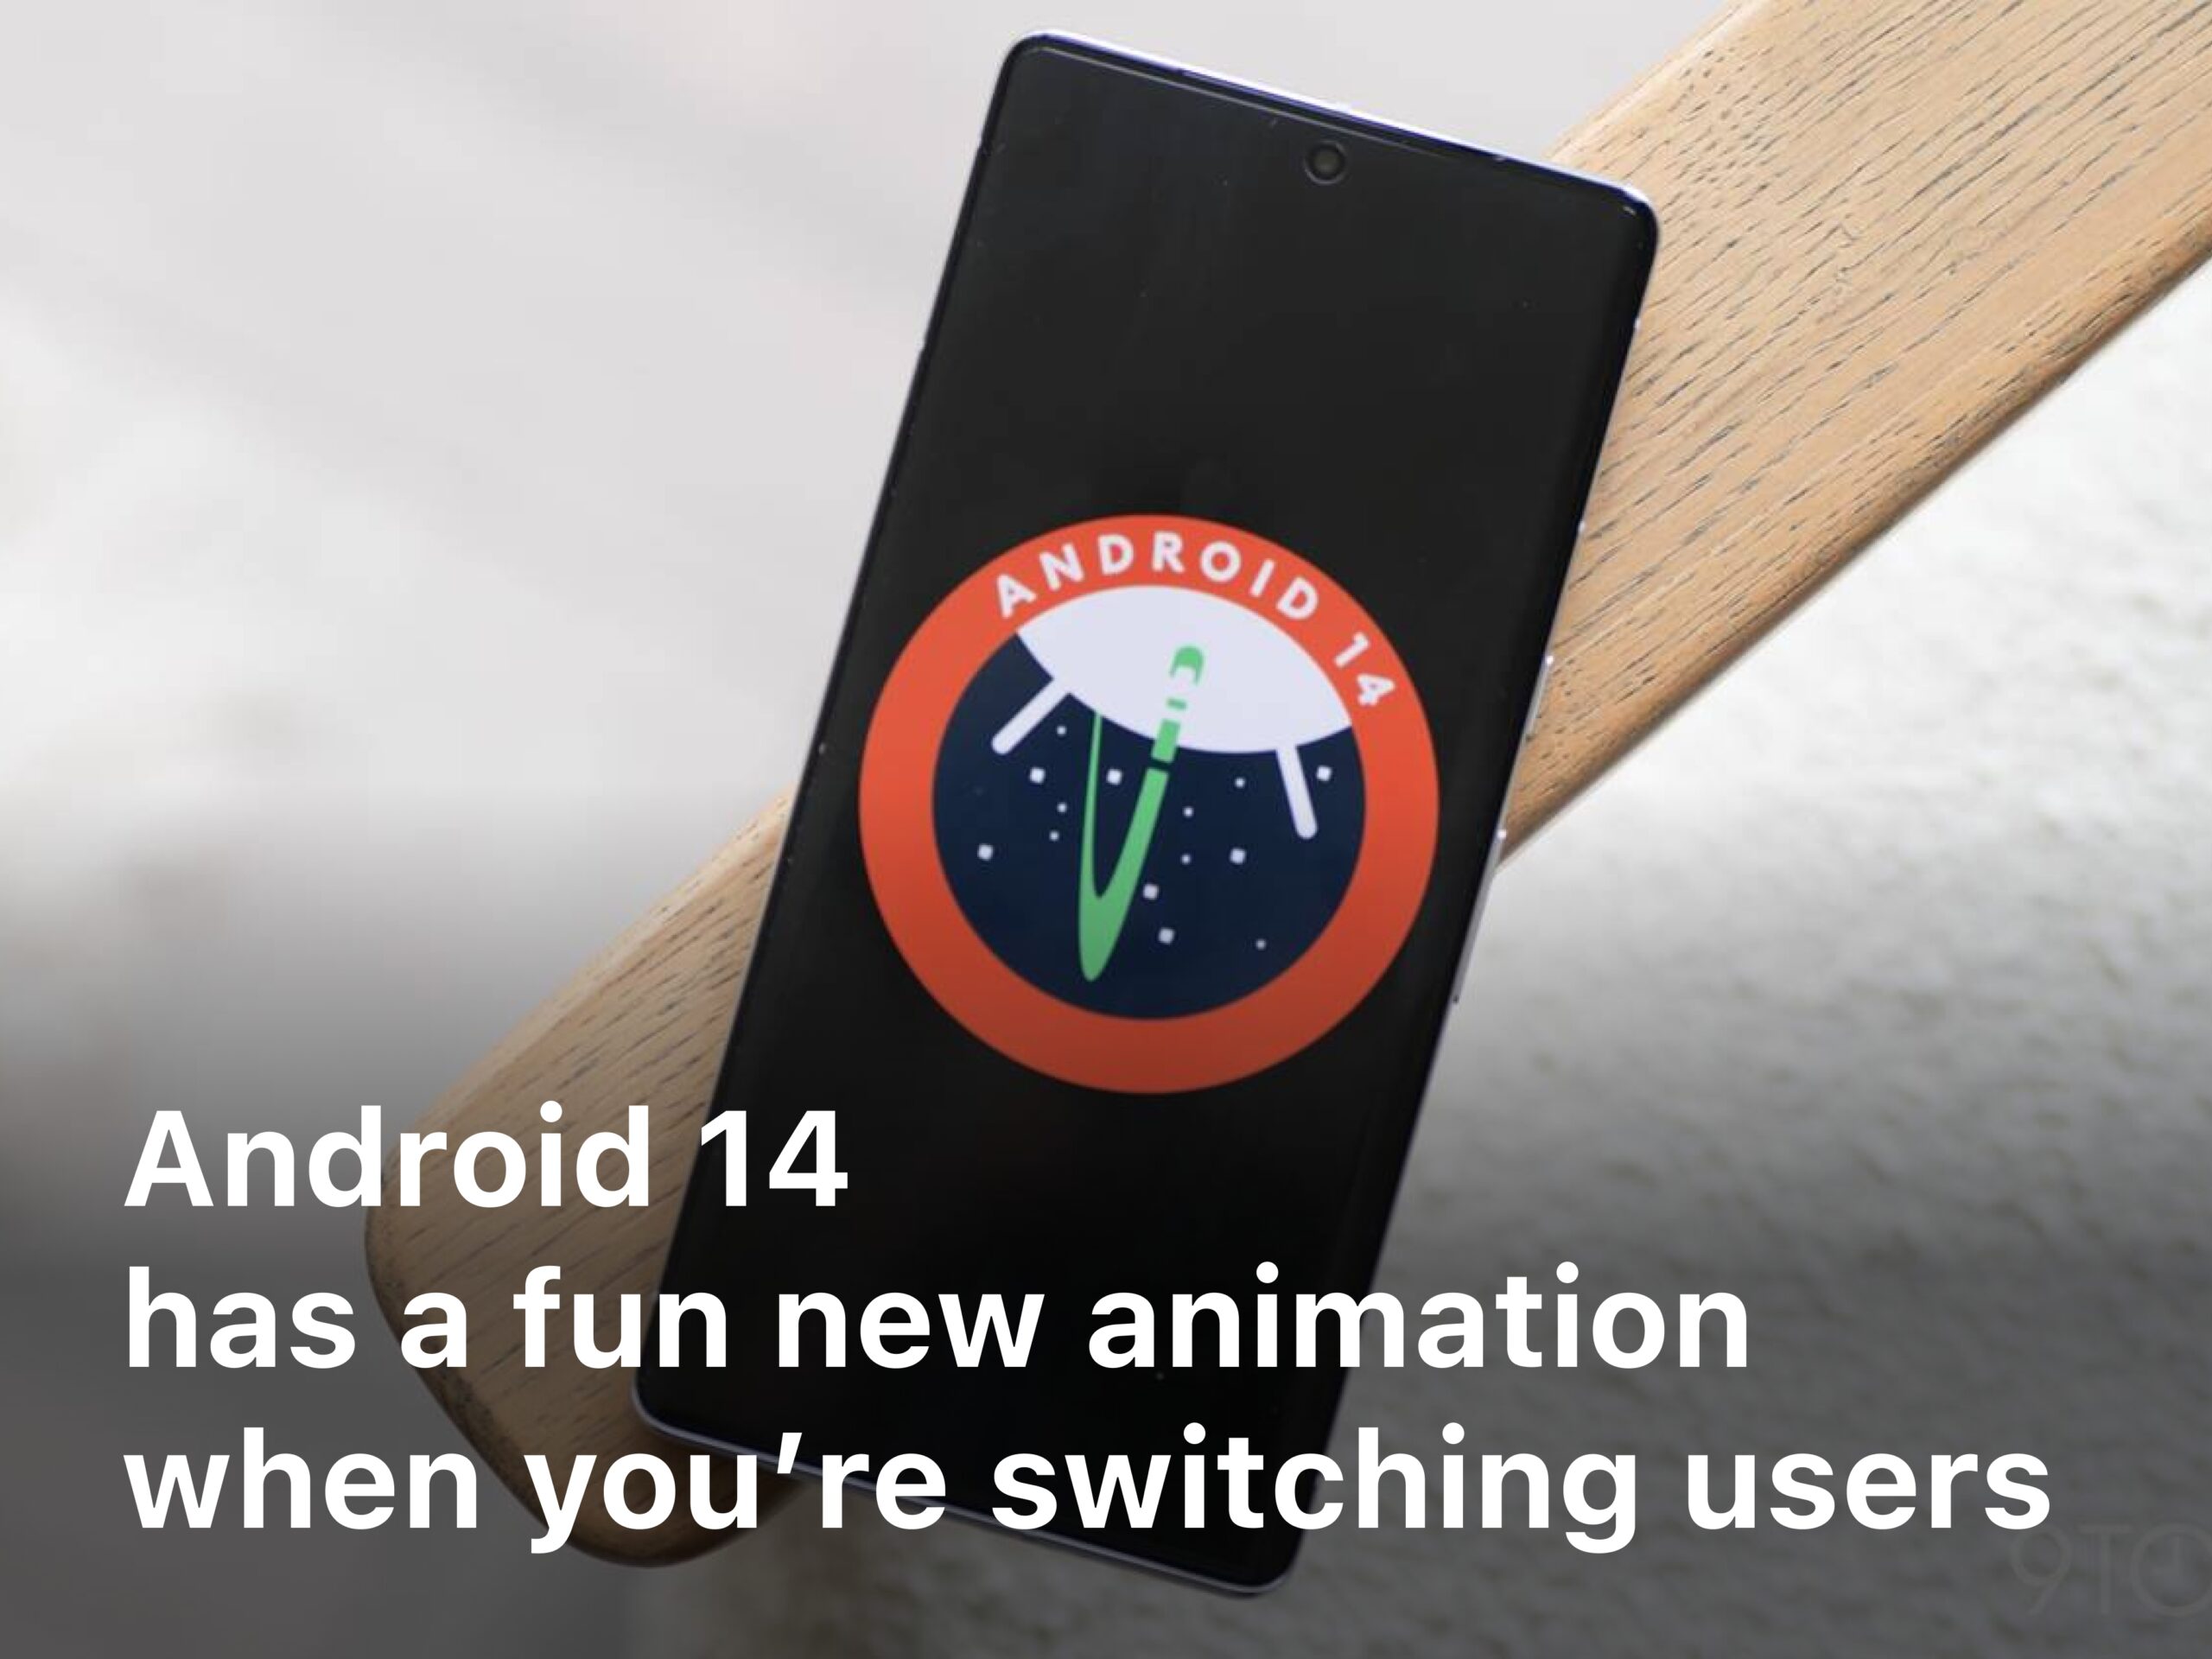 Android 14 has a fun new animation